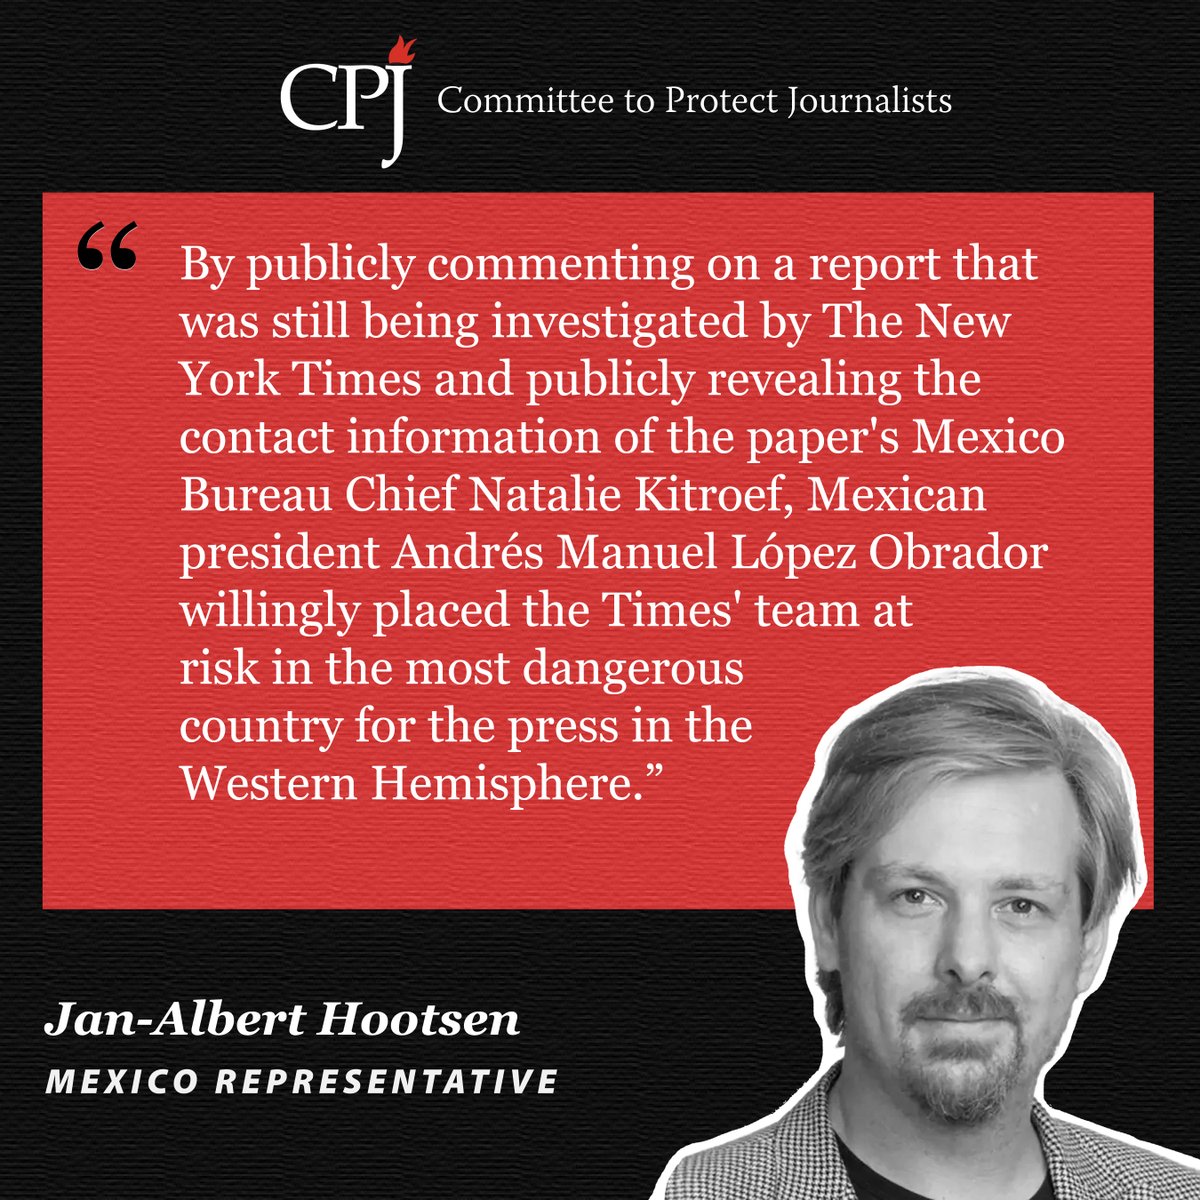 By publicly commenting on a report that was still being investigated by @nytimes & publicly revealing the contact information the paper's Mexico Bureau Chief @Nataliekitro, @lopezobrador_ willingly placed the Times' team at risk in the most dangerous country for the press in the…